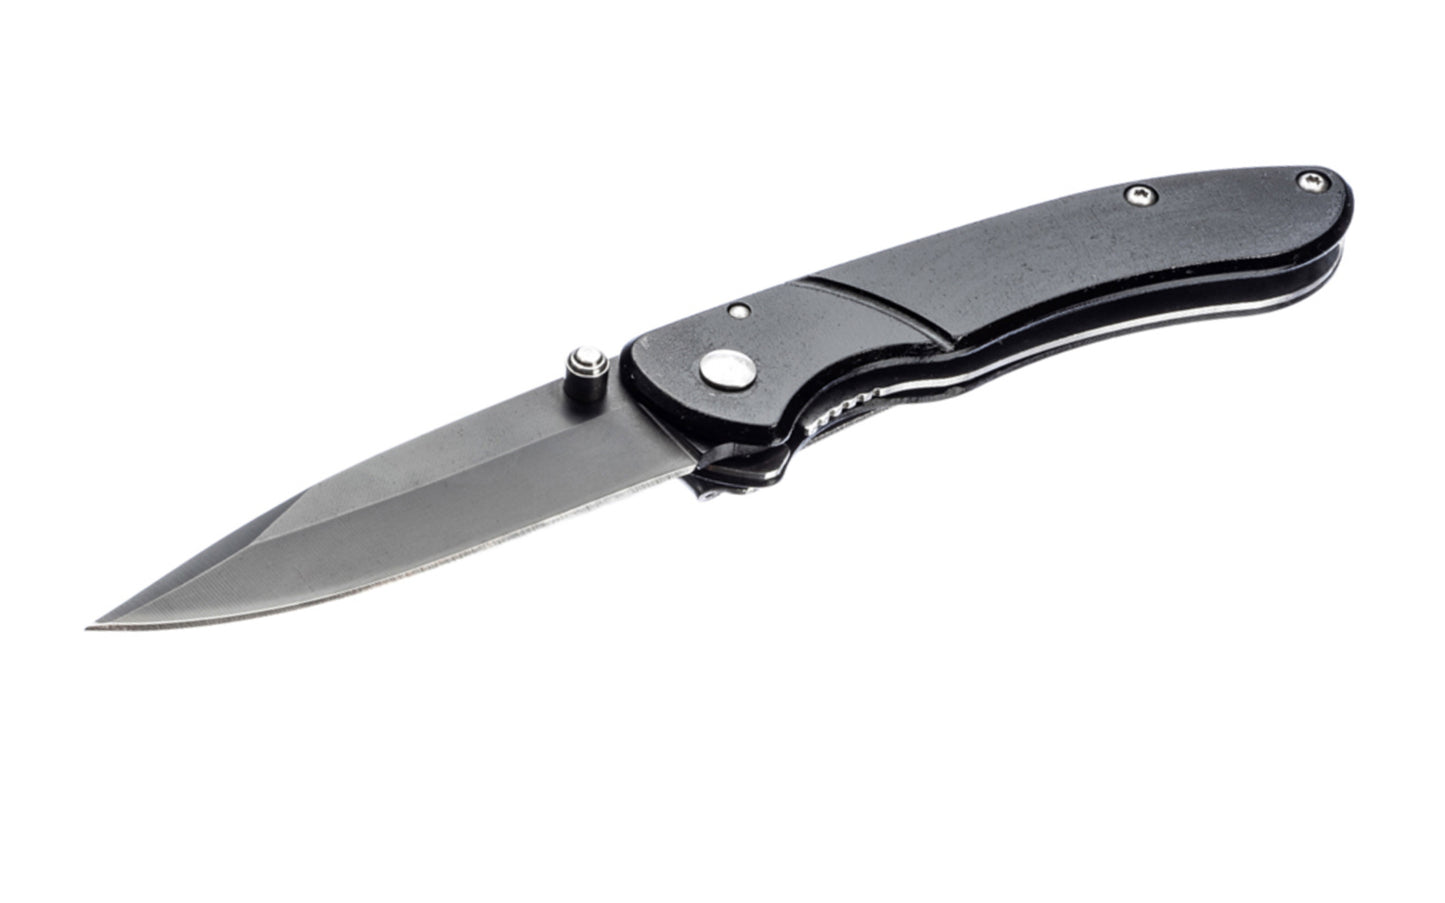 3-3/4" Pocket Knife with Aluminum Black Body. Stainless blade with a black finish. Belt clip attached to knife. 2-3/4" blade length. Includes sheath. Made by SE.